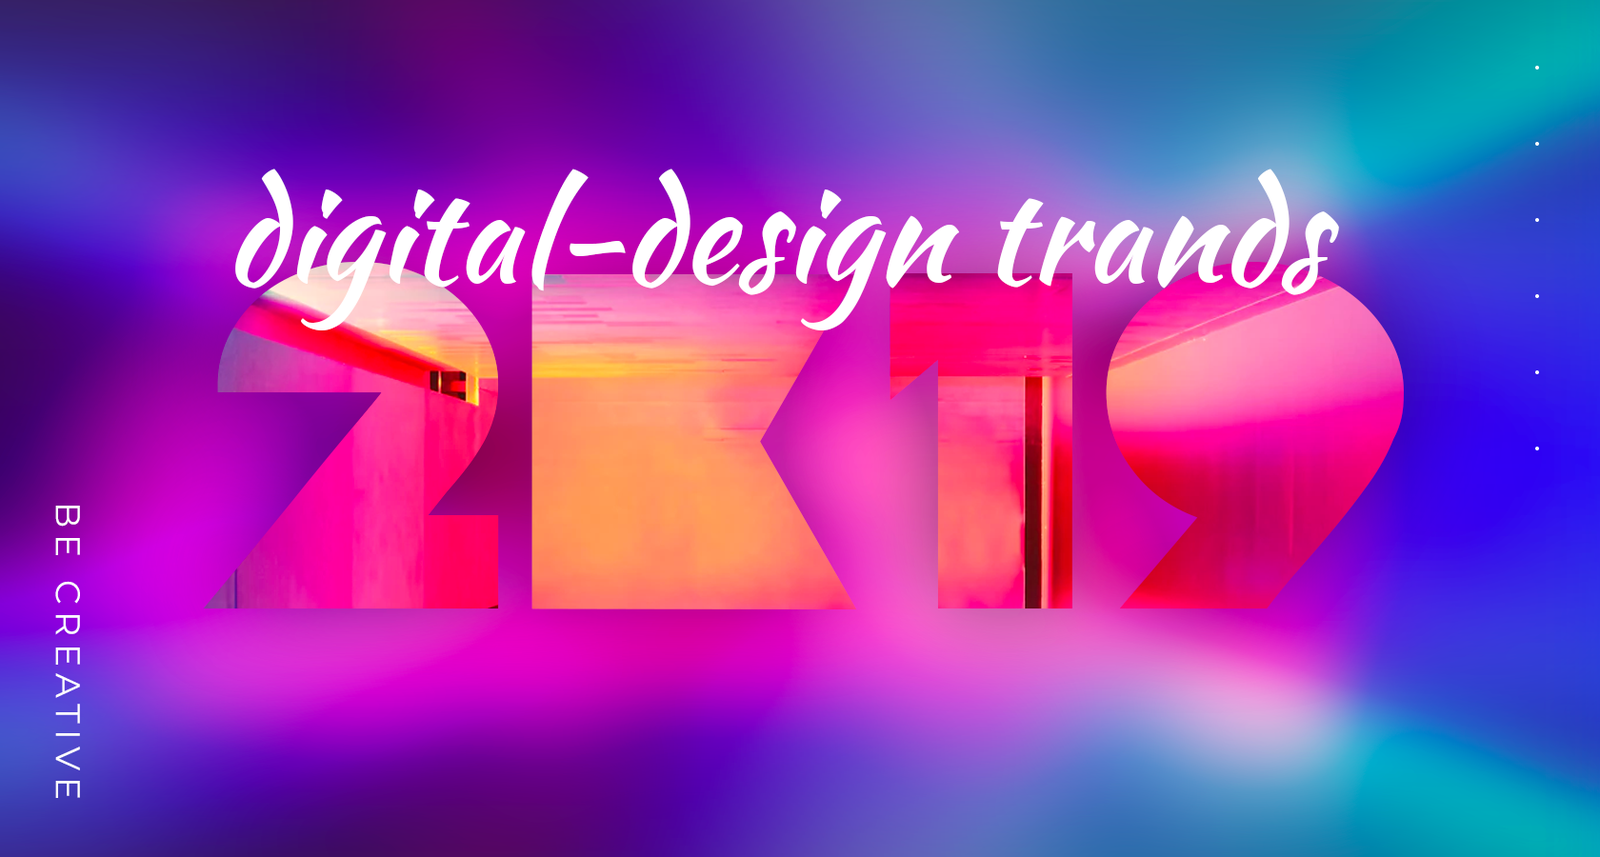 Digital design trends your competitors will be using in 2019 - My, Design, Web design, Business, Digital, 2019, Longpost